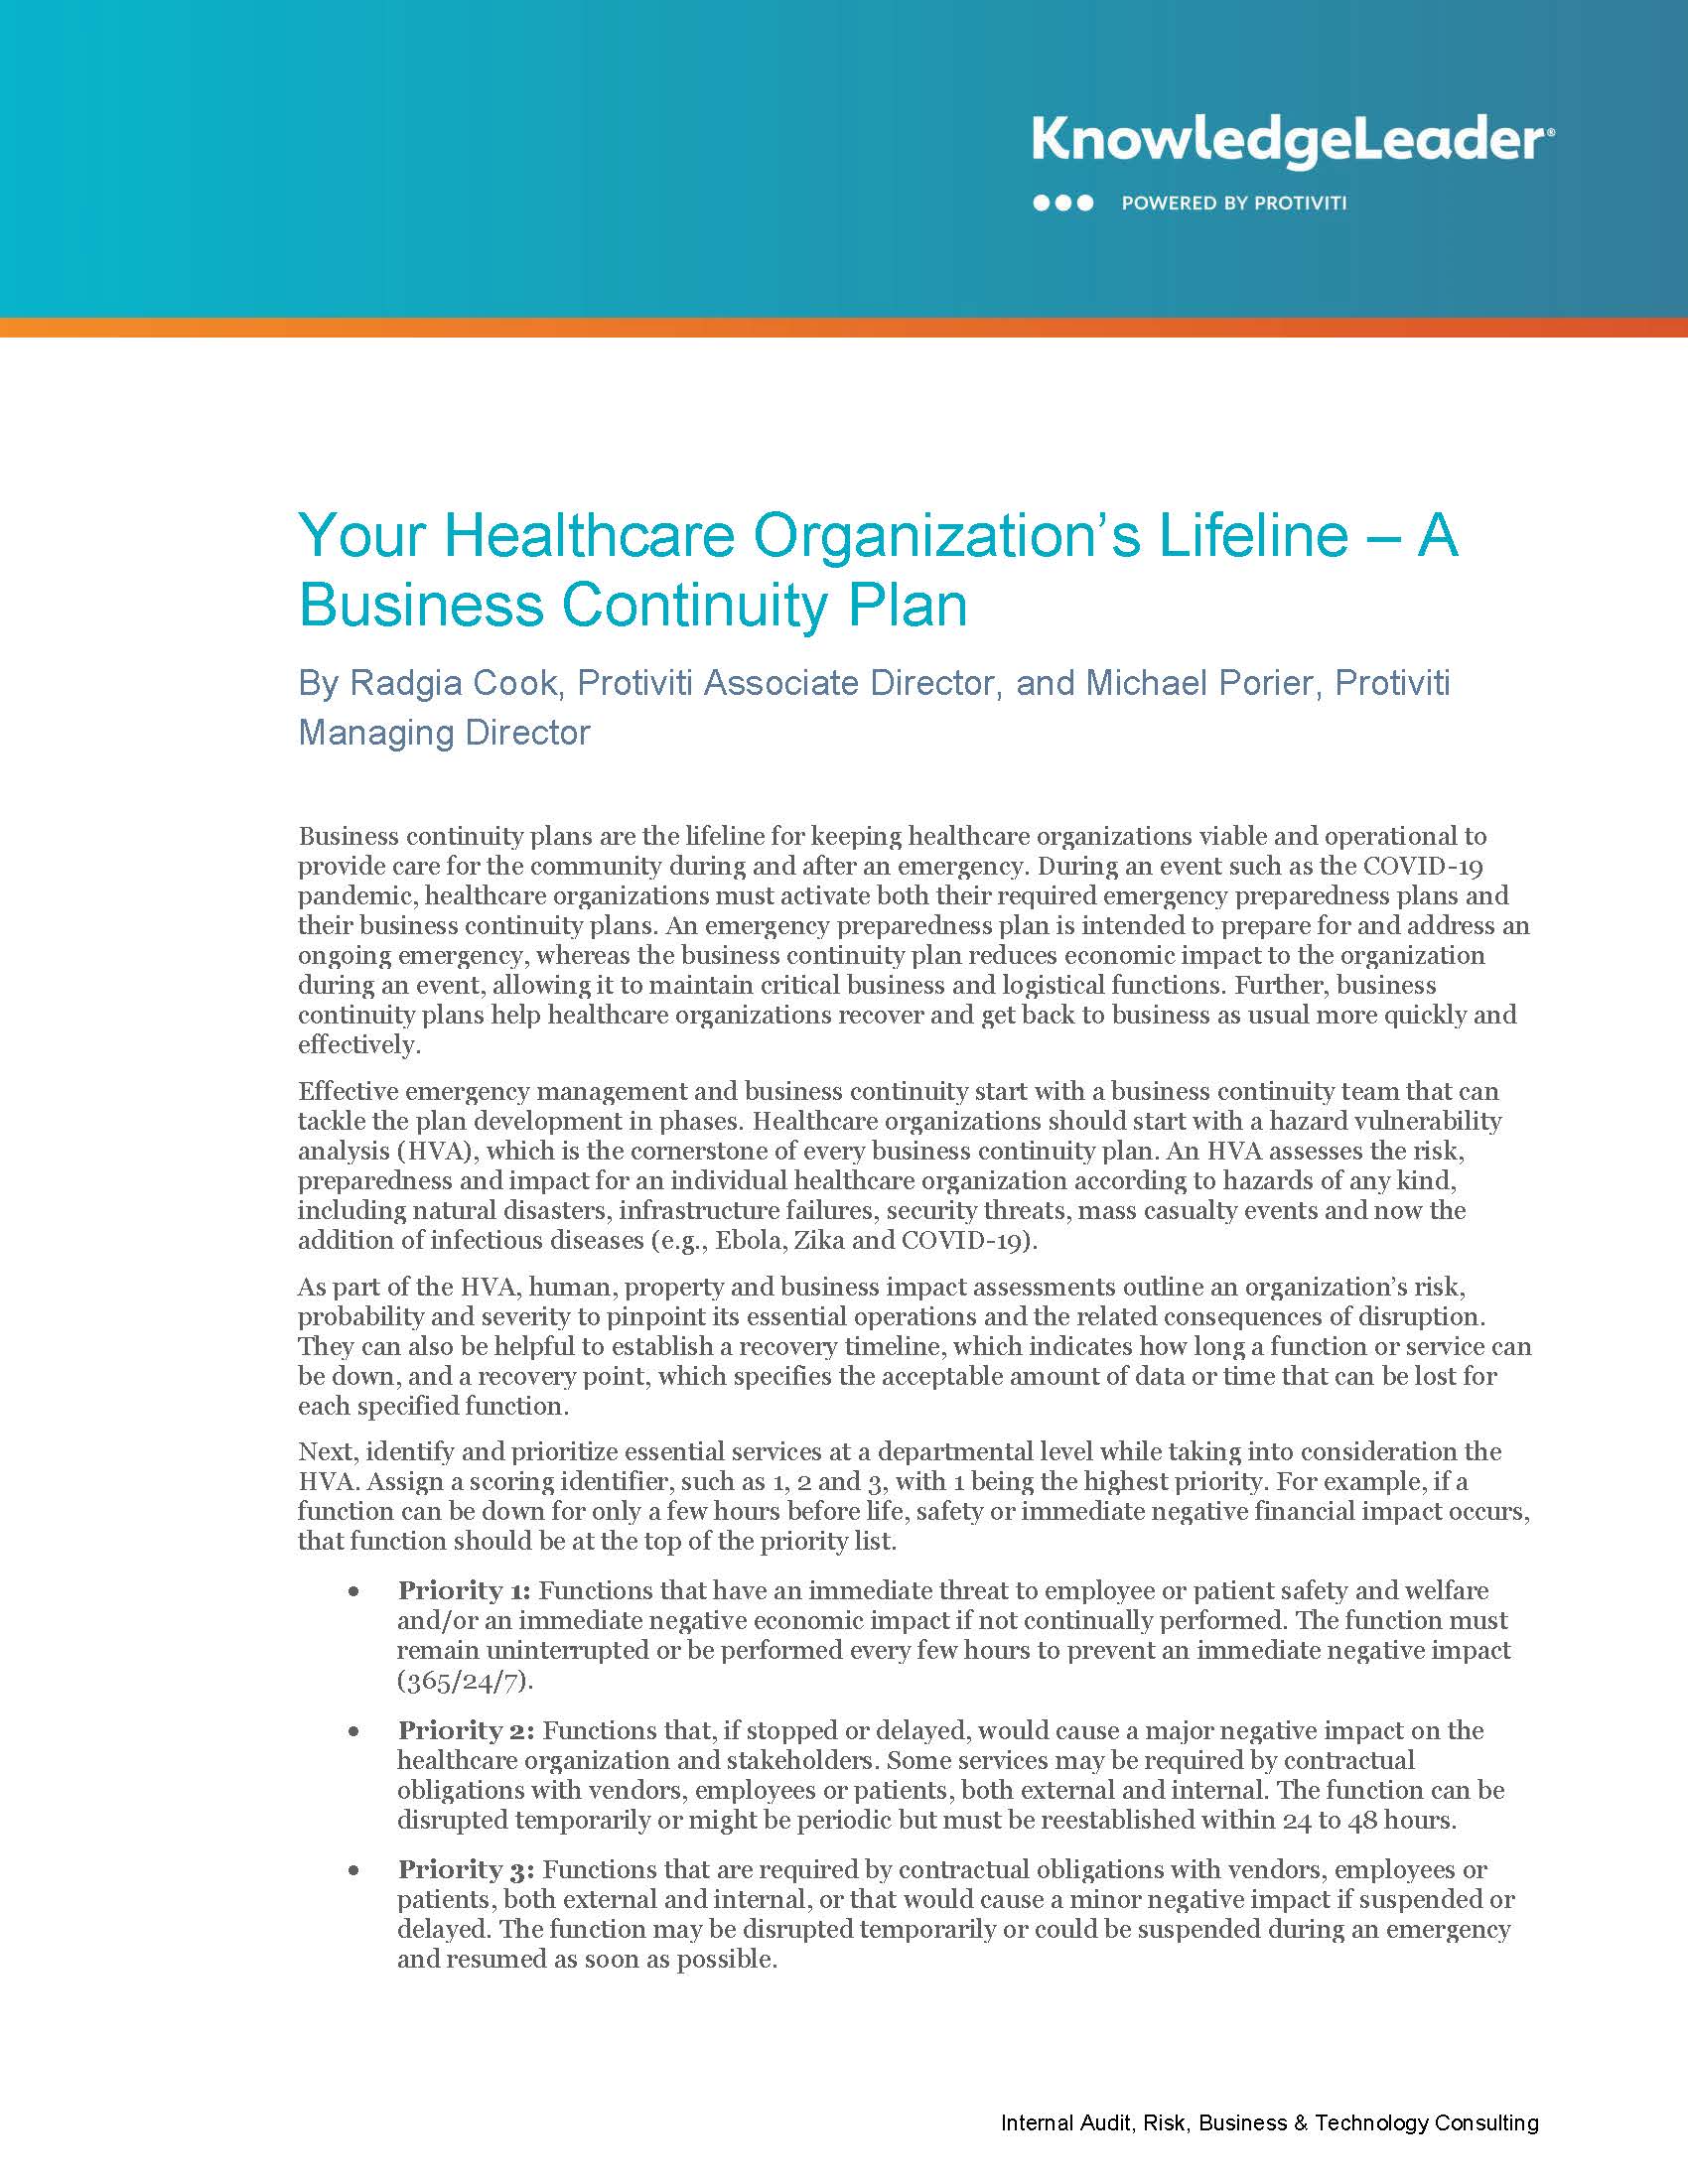 Screenshot of the first page of Your Healthcare Organization’s Lifeline — A Business Continuity Plan